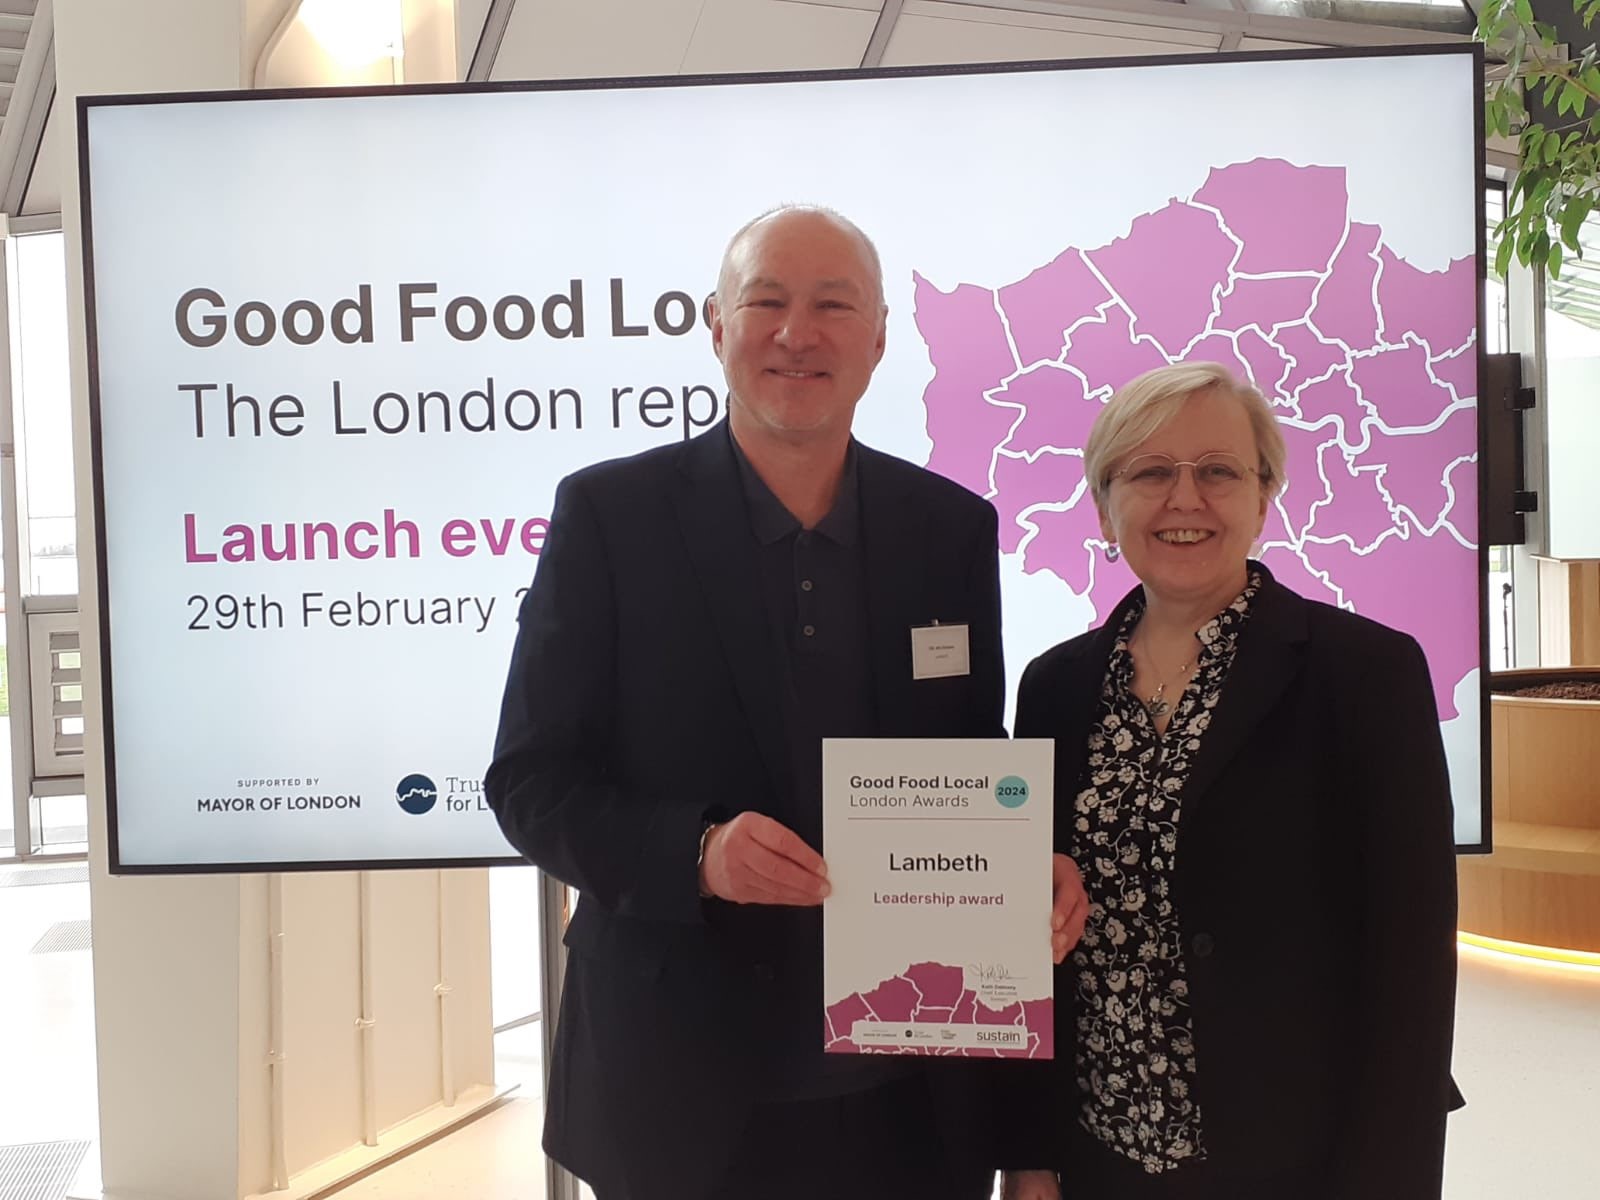 Lambeth: Recognition for ensuring good food for residents